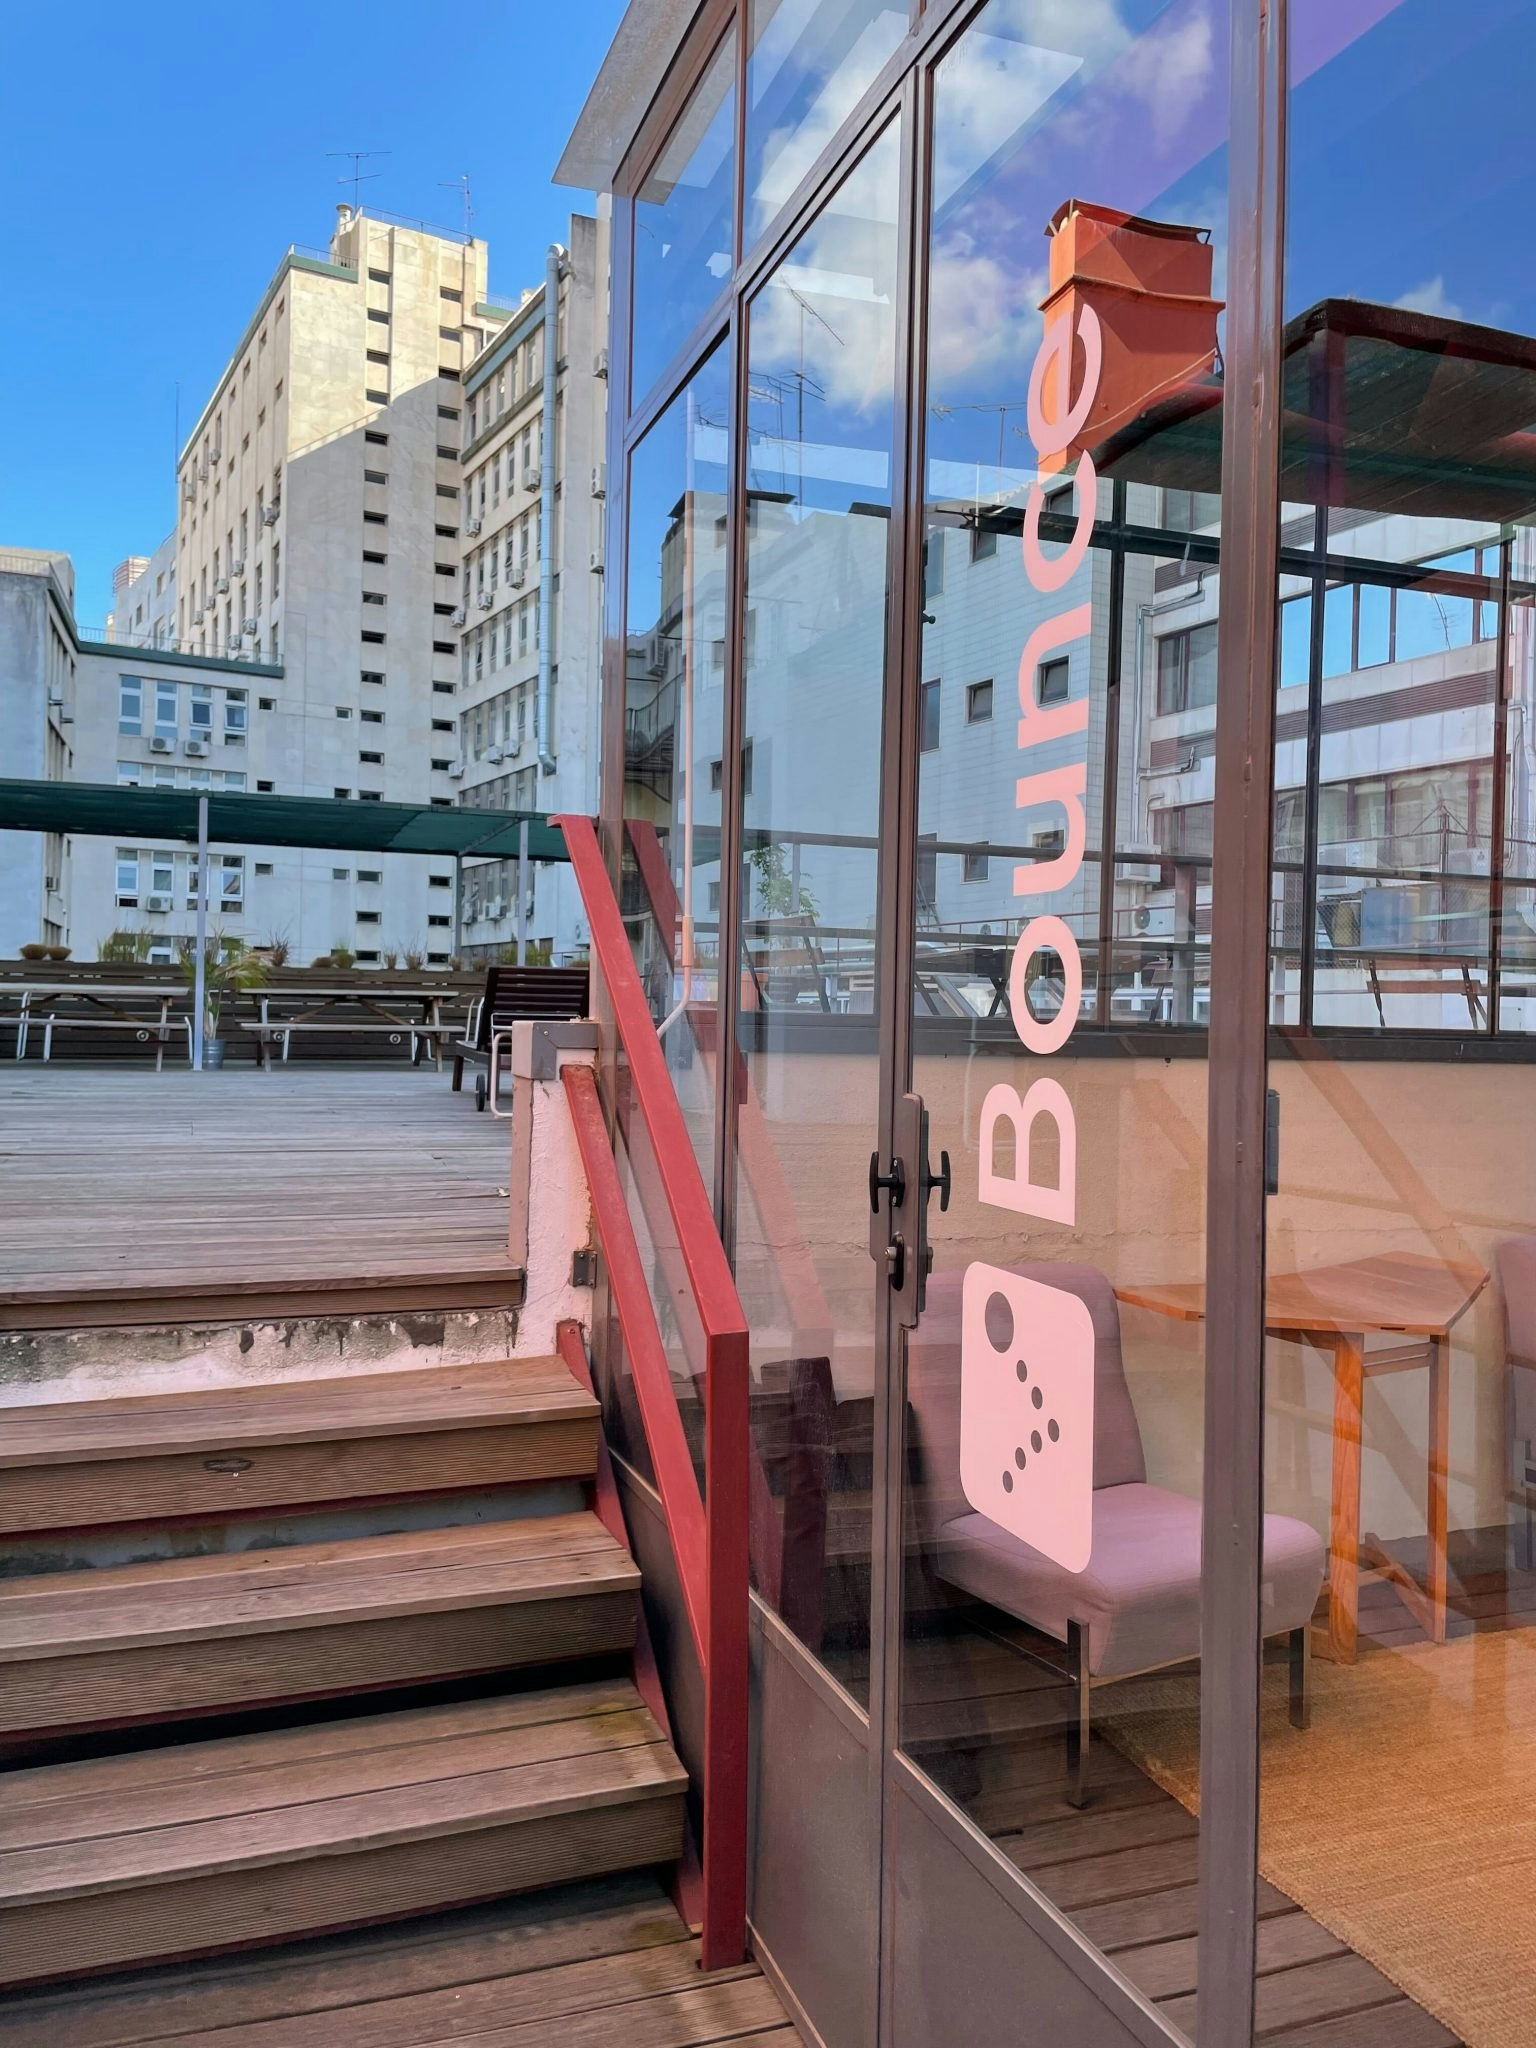 Bounce's rooftop workspace